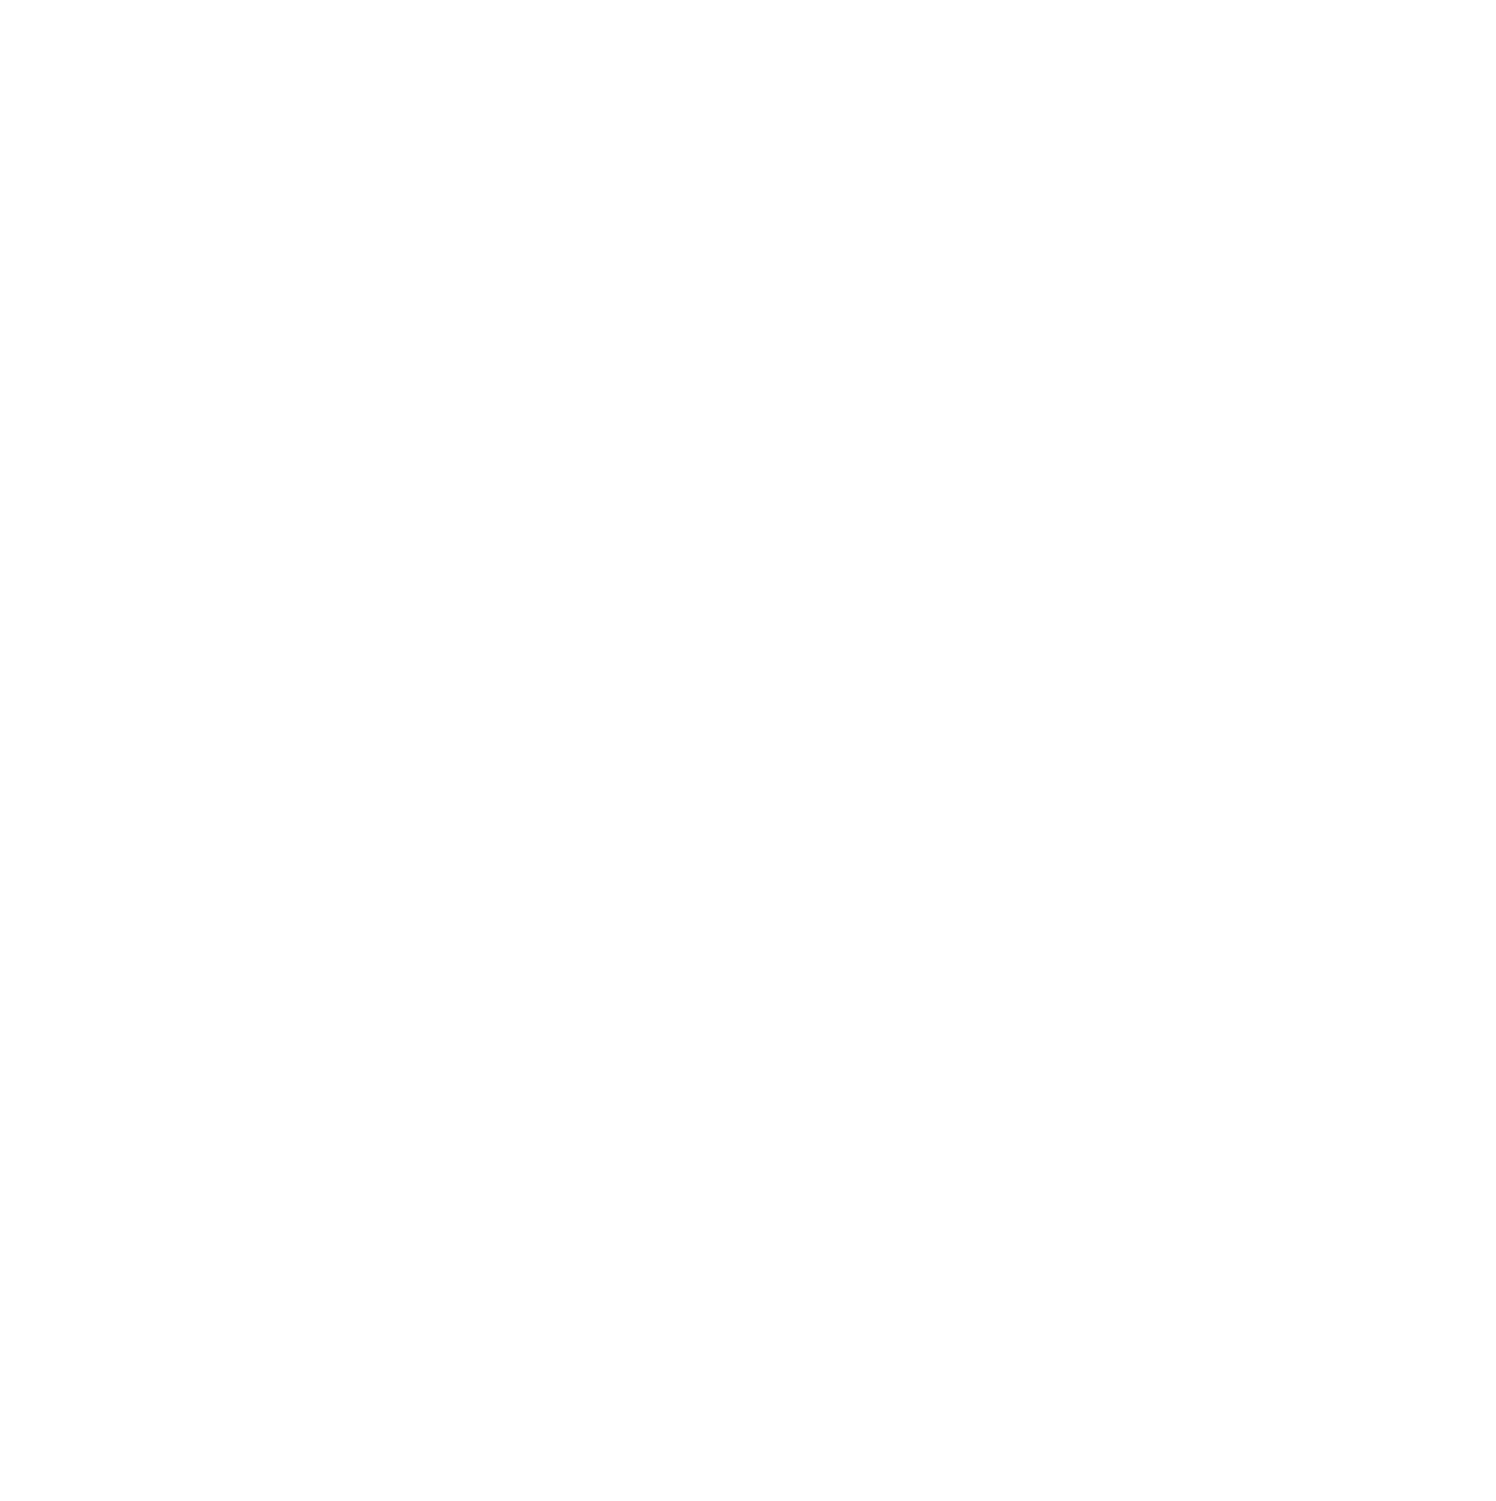 EFP Consulting